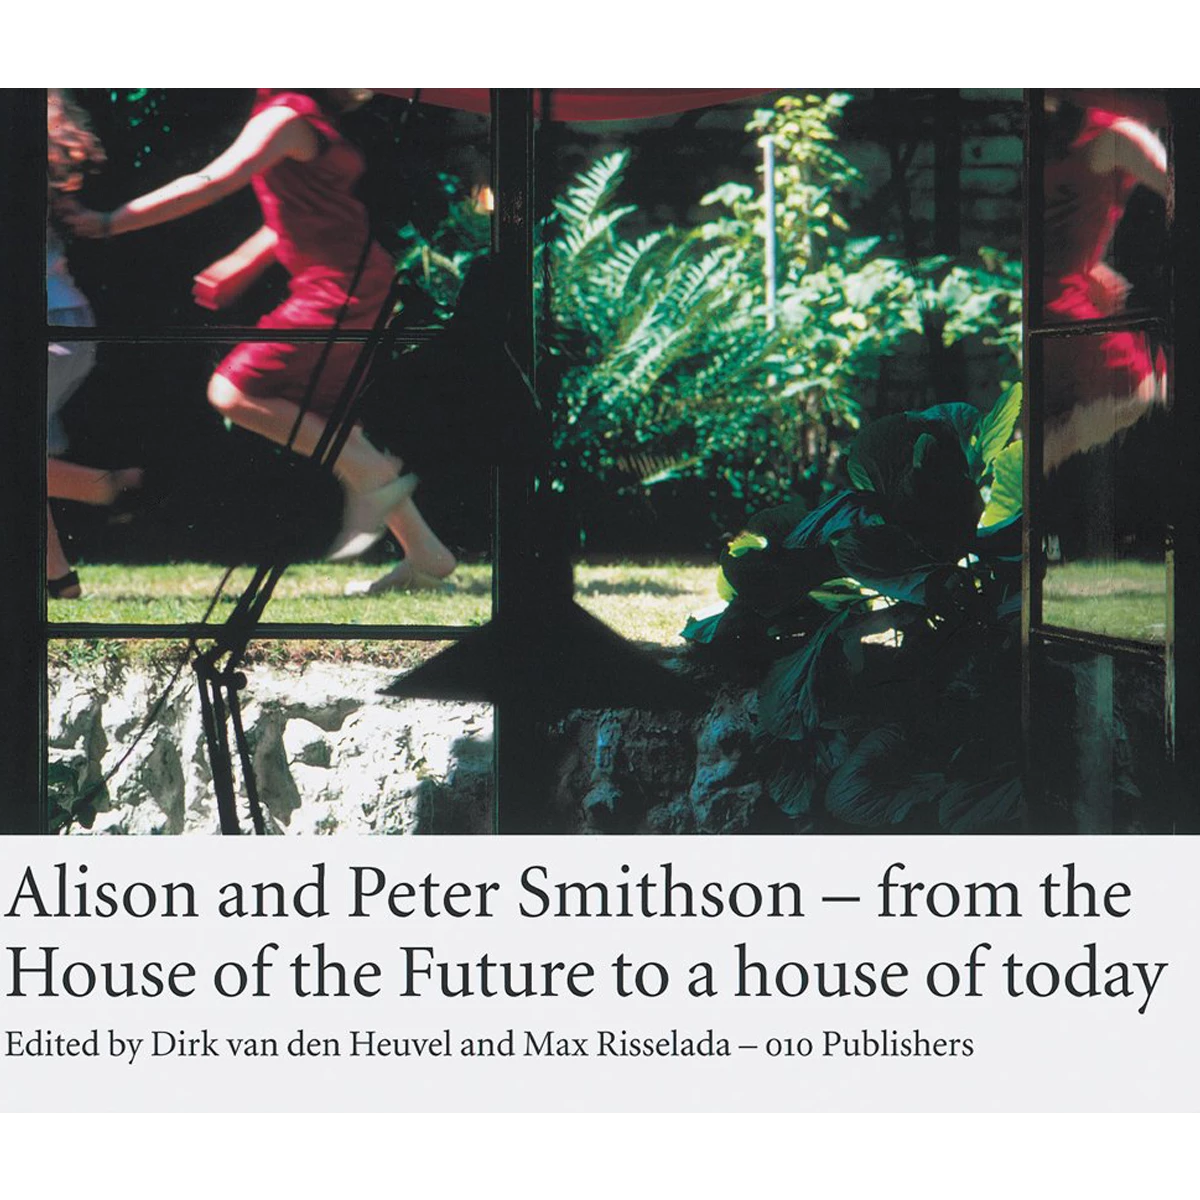 Alison and Peter Smithson: From the House of the Future to a house of today